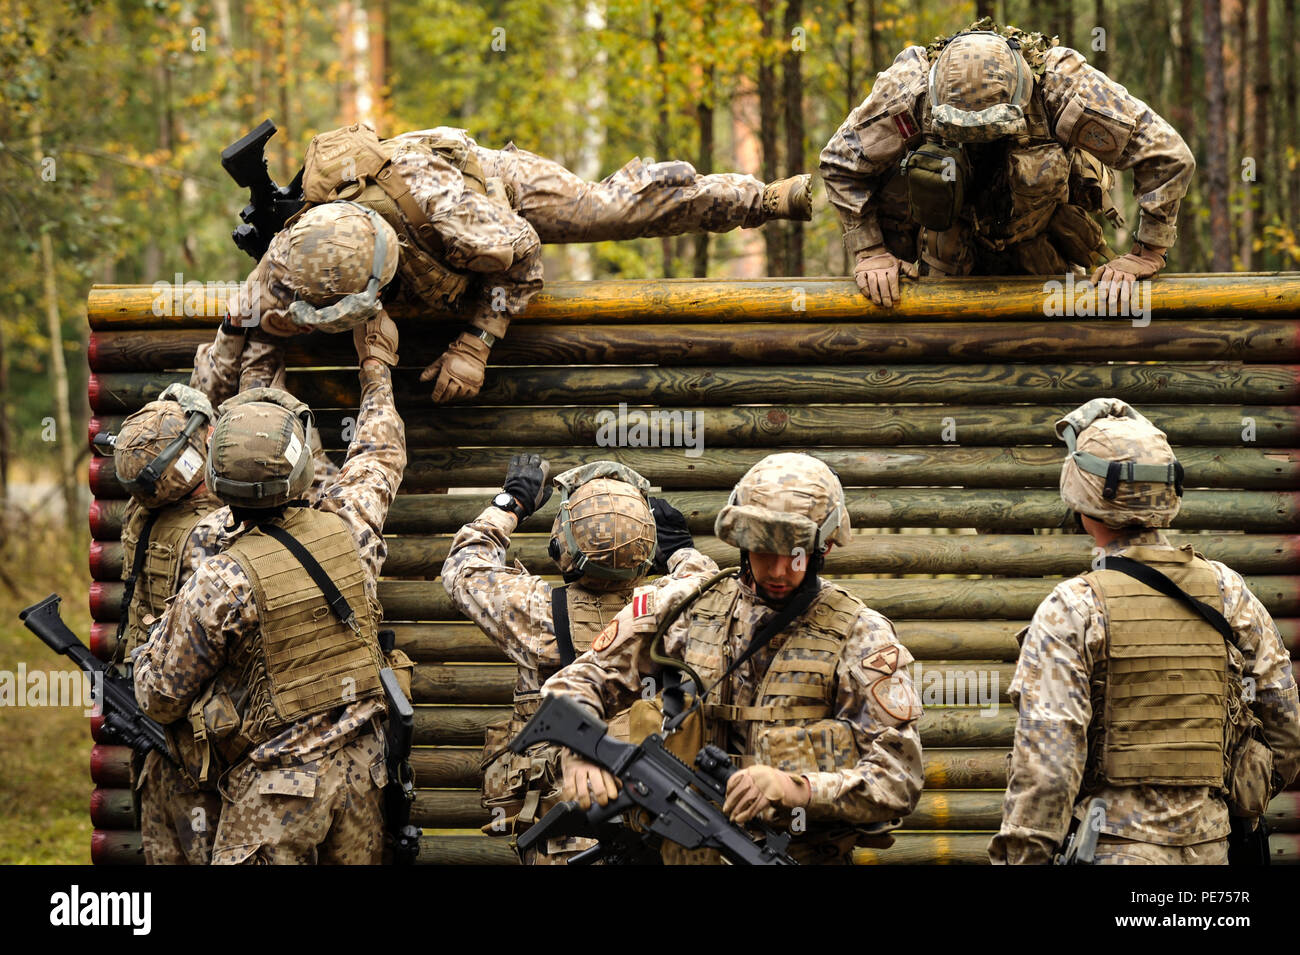 Latvian army soldiers get over a wall obstacle at the Tactical Shoot lane during the European Best Squad Competition (EBSC) held at the 7th Army Joint Multinational Training Command's Grafenwoehr Training Area, Germany, Oct. 19, 2015. The EBSC is an Army Europe competition challenging militaries from across Europe to compete and enhance teamwork with Allies and partner nations. The competition is multinational by design and involves units from 13 nations with 17 squads competing for the right to be Europe's Best Squad. (U.S. Army photo by Visual Information Specialist Markus Rauchenberger/rele Stock Photo